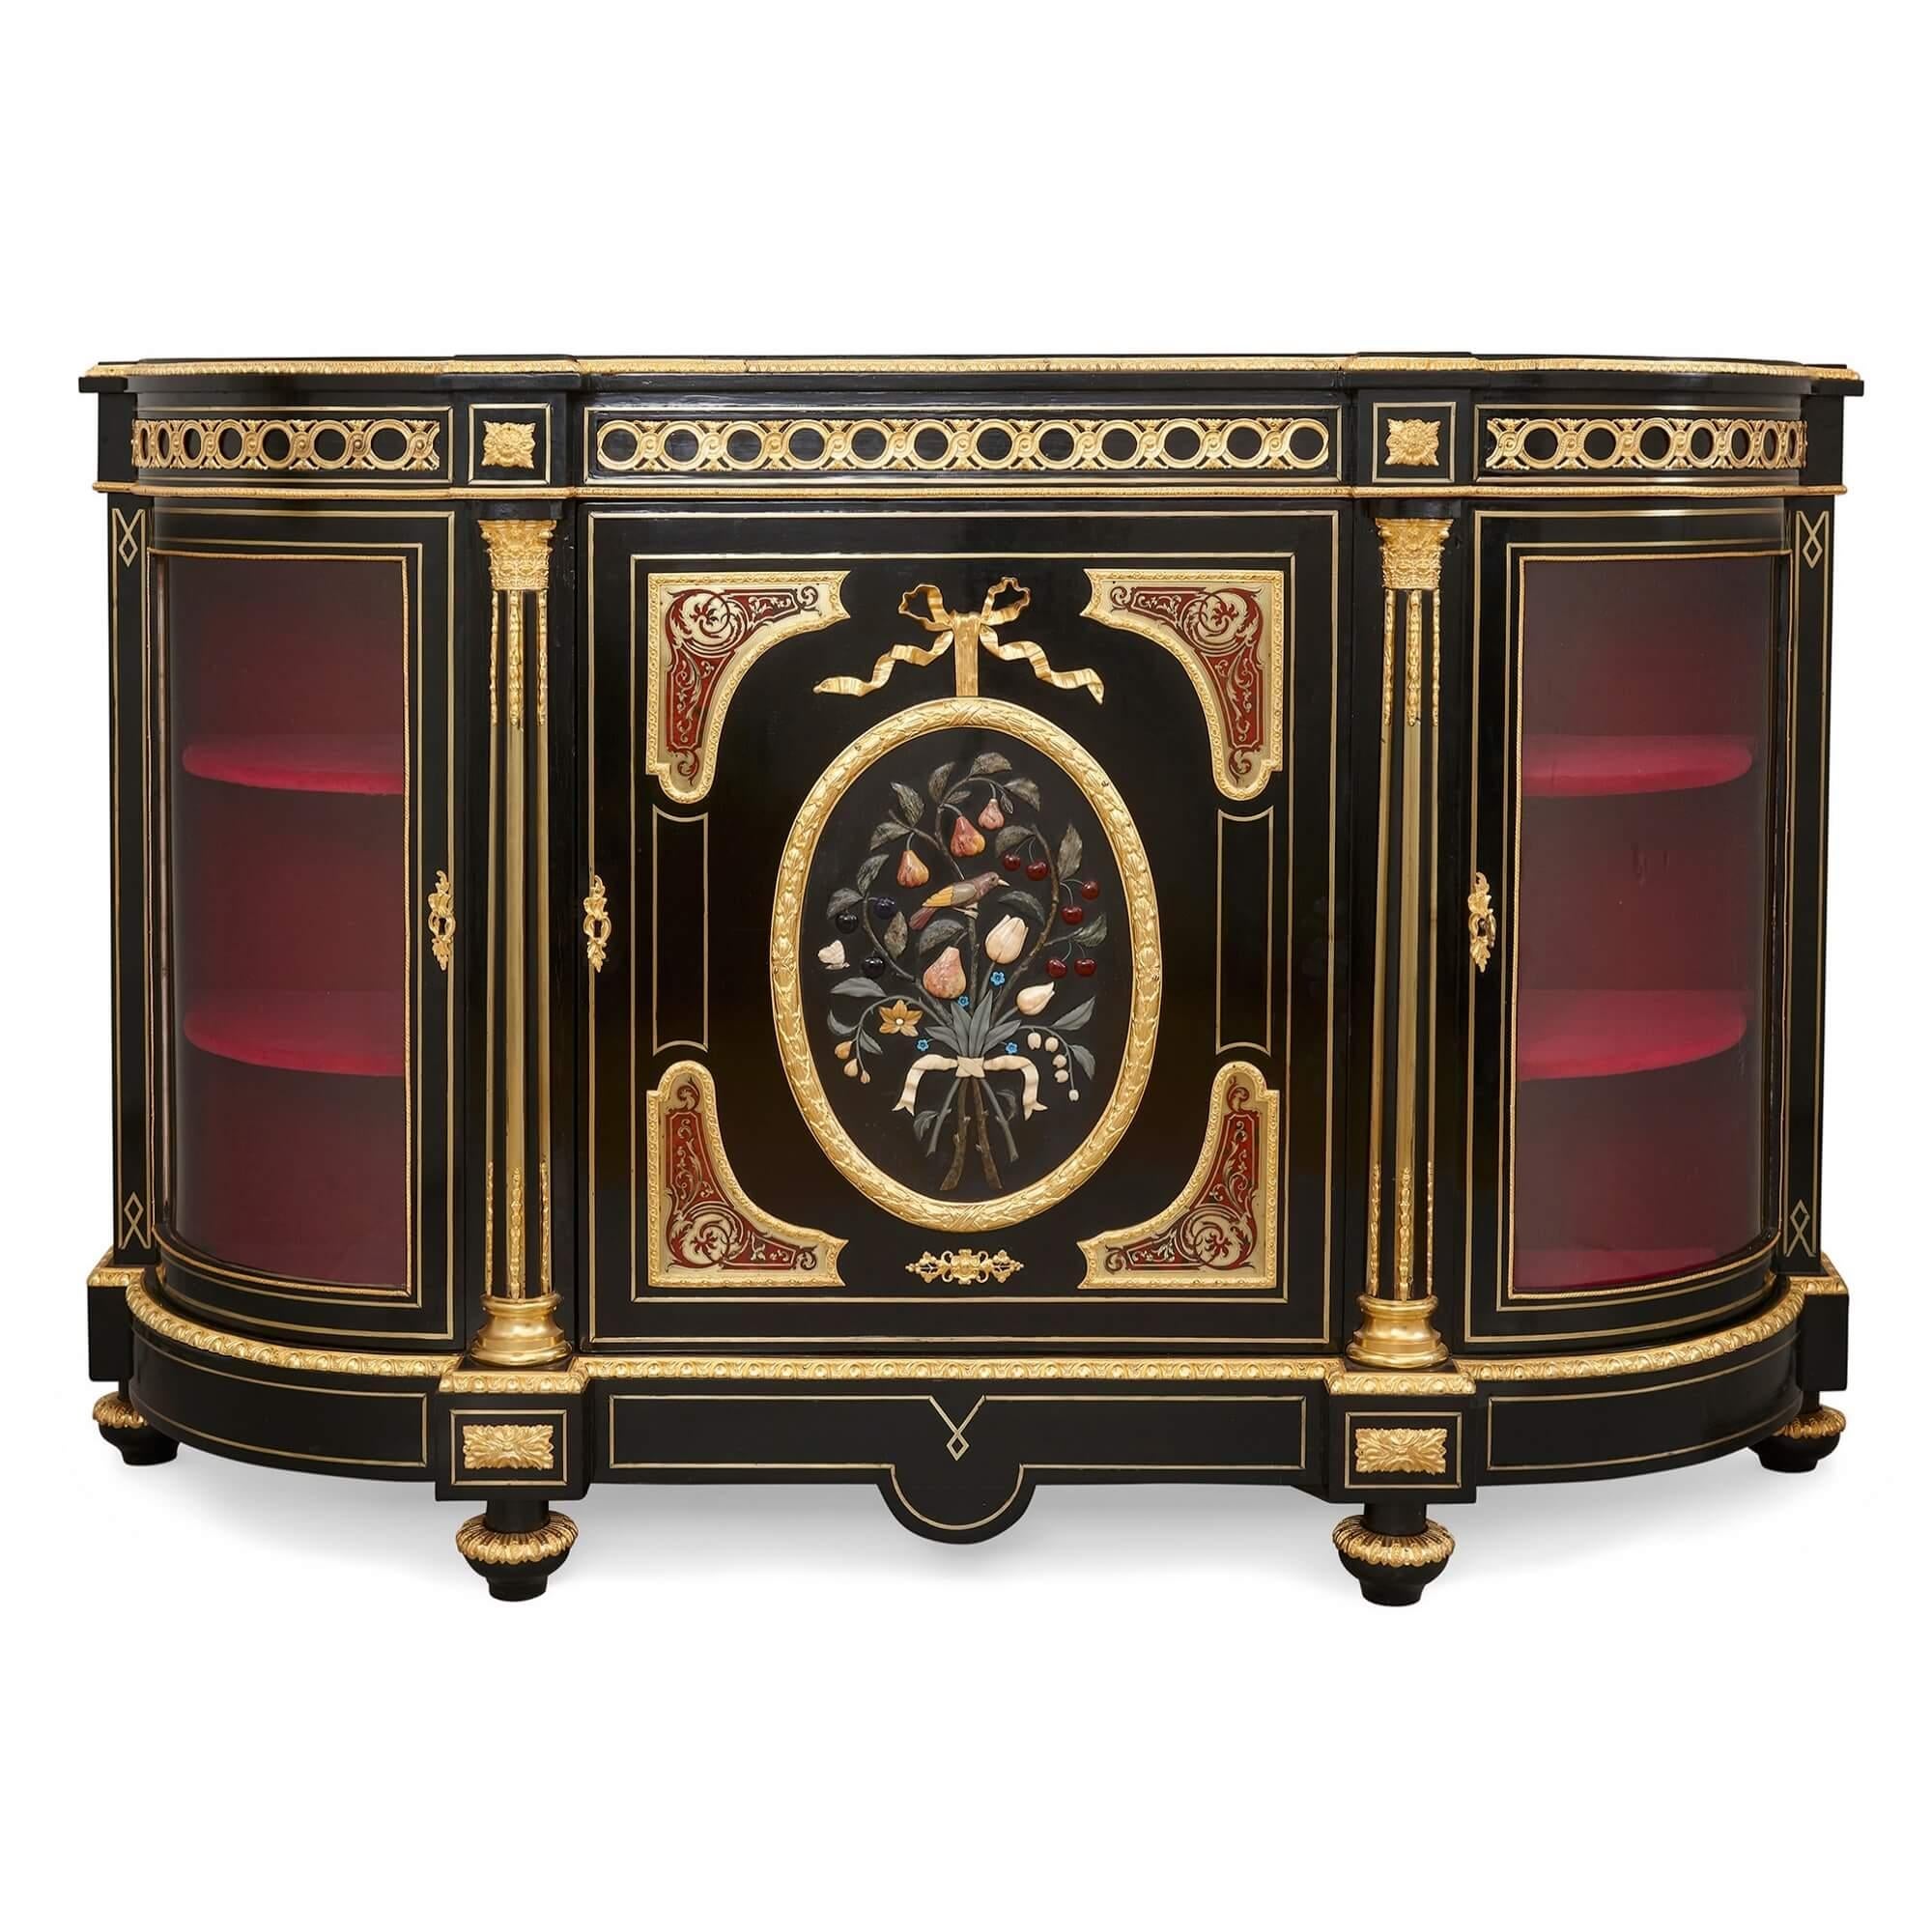 Hardstone, ormolu and Boulle mounted ebonised wood sideboard
French, Late 19th Century
Height 114cm, width 178cm, depth 50cm

This splendid sideboard, carved from ebonised wood, stands as an exceptional testament to the fine craftsmanship in late